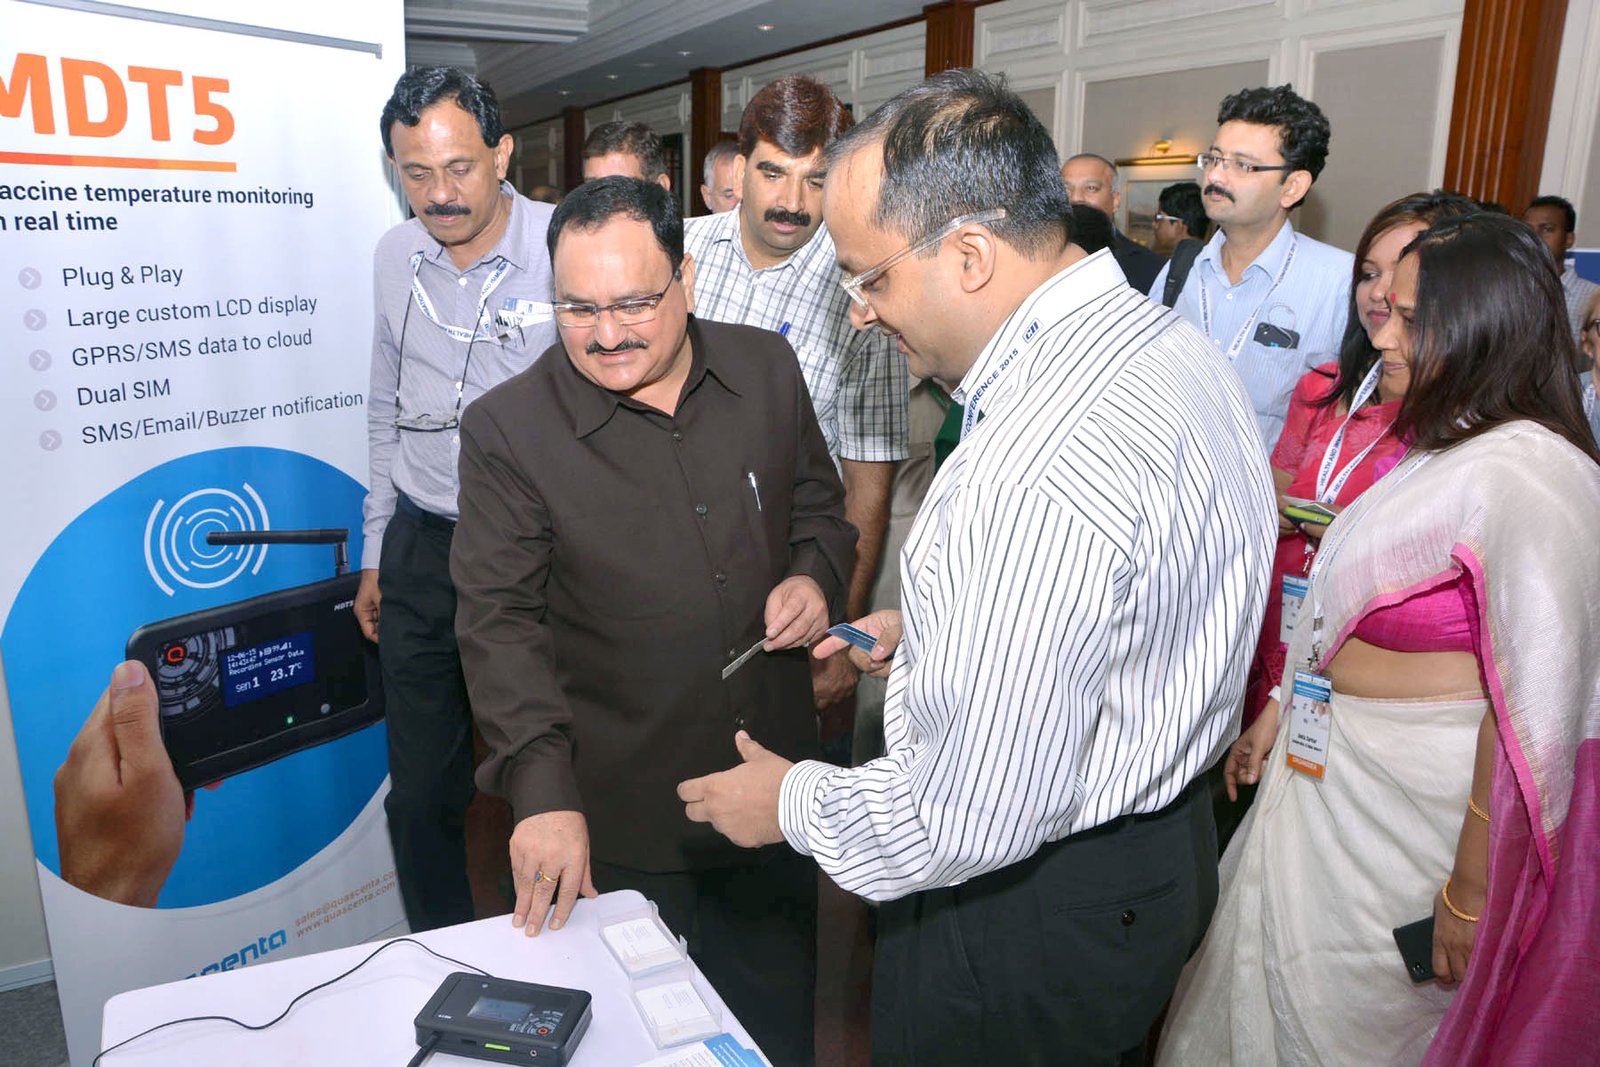 The union minister for health and family welfare, Mr JP Nadda taking a round at the health and immunization conference, organised by CII, in New Delhi on June 30, 2015